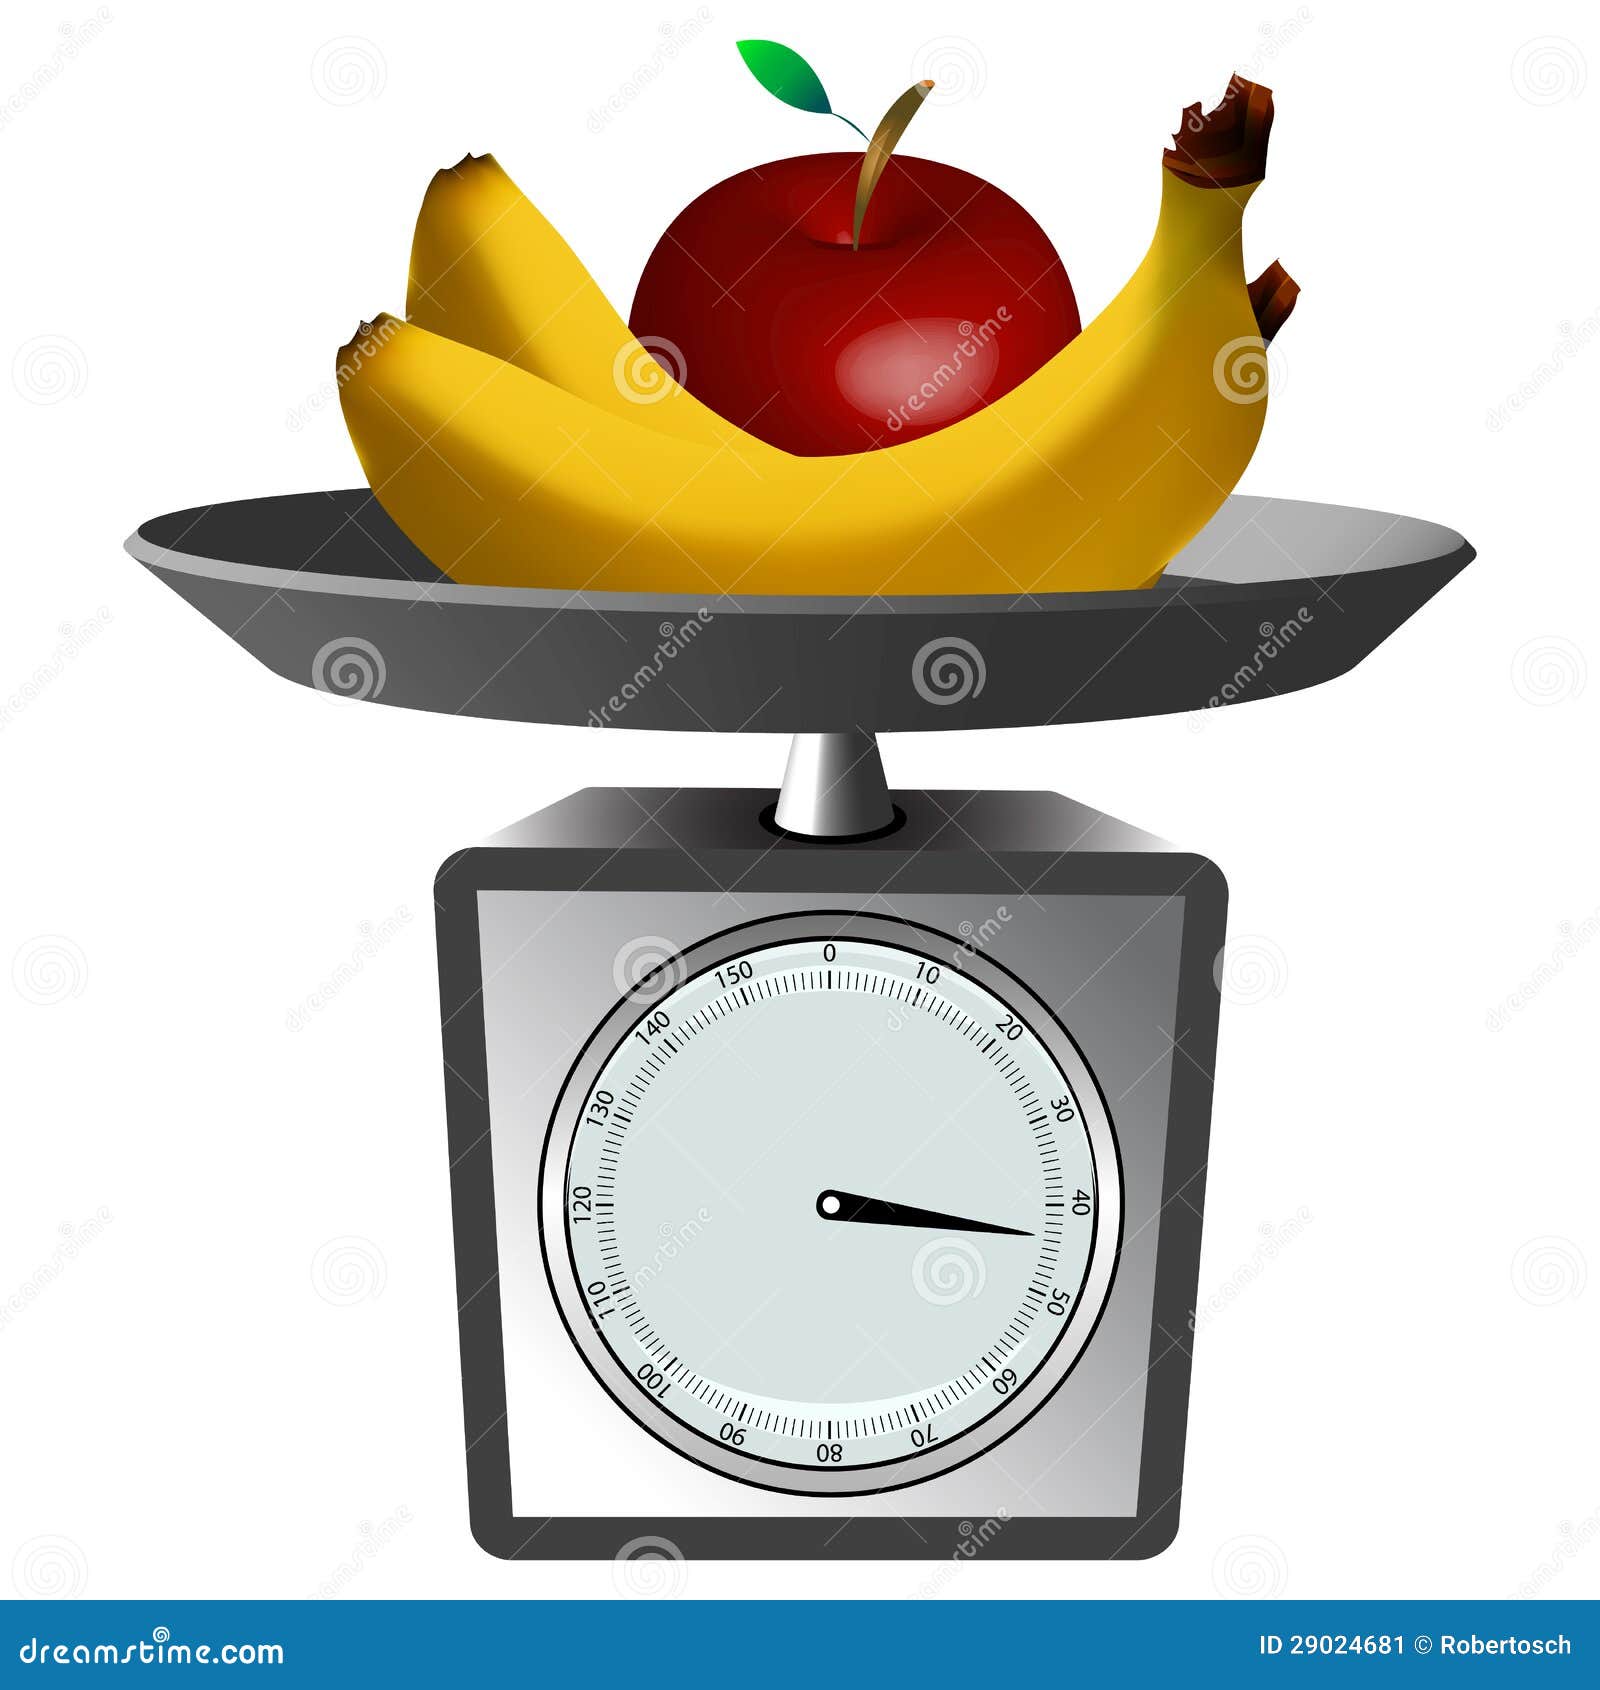 Fruits and scale stock vector. Illustration of balance - 29024681